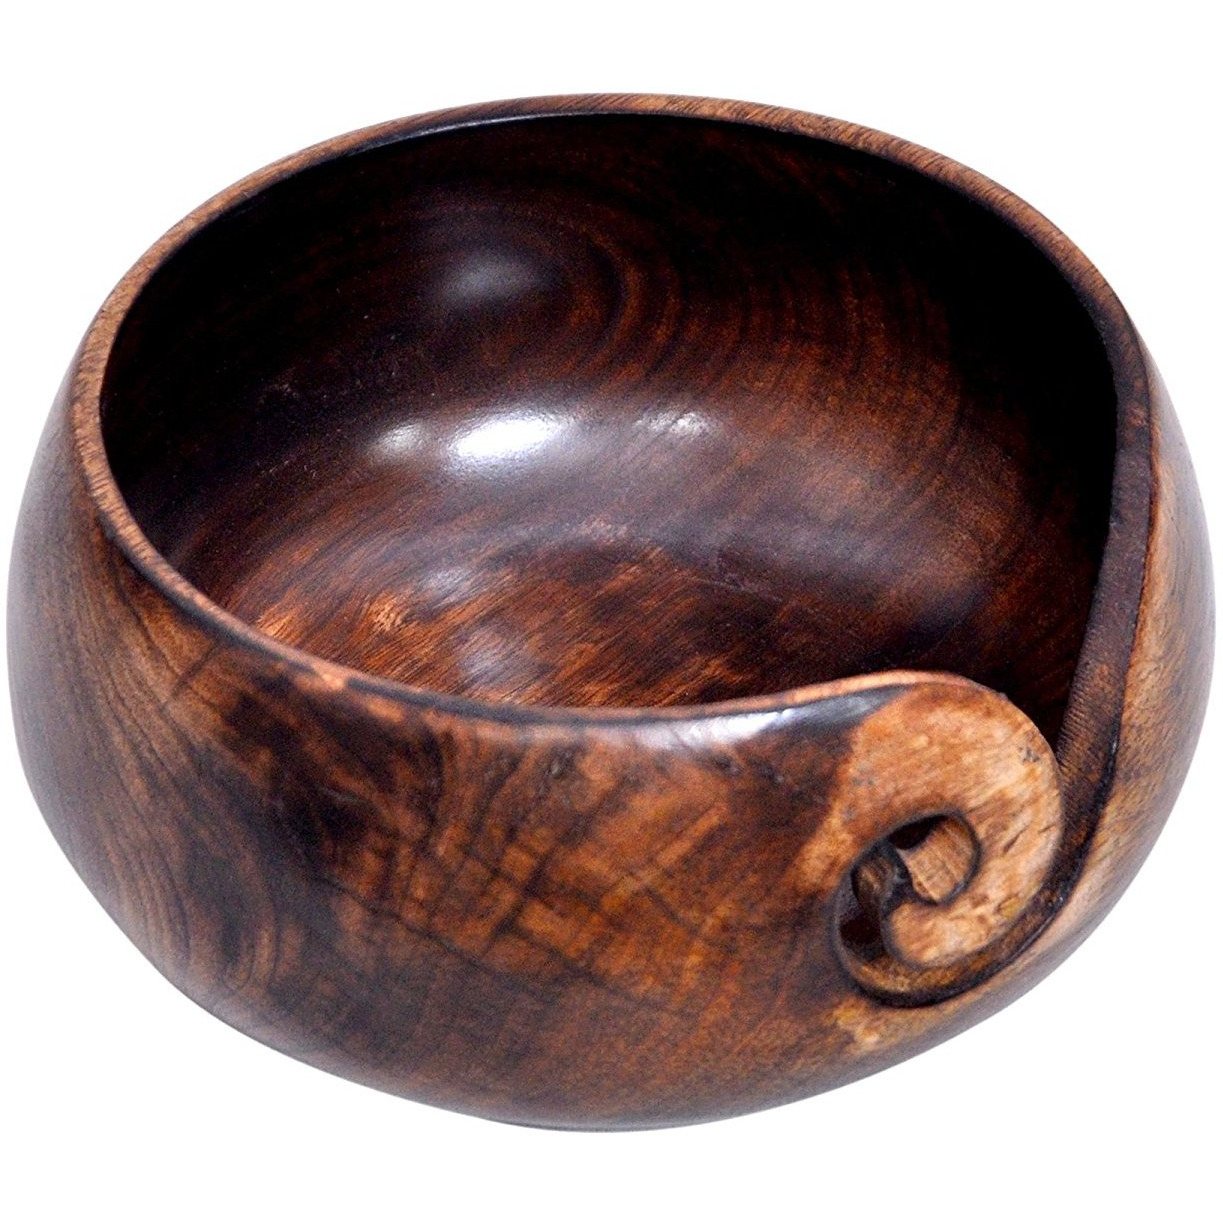 Handcrafted Wood Yarn Bowl for Knitting